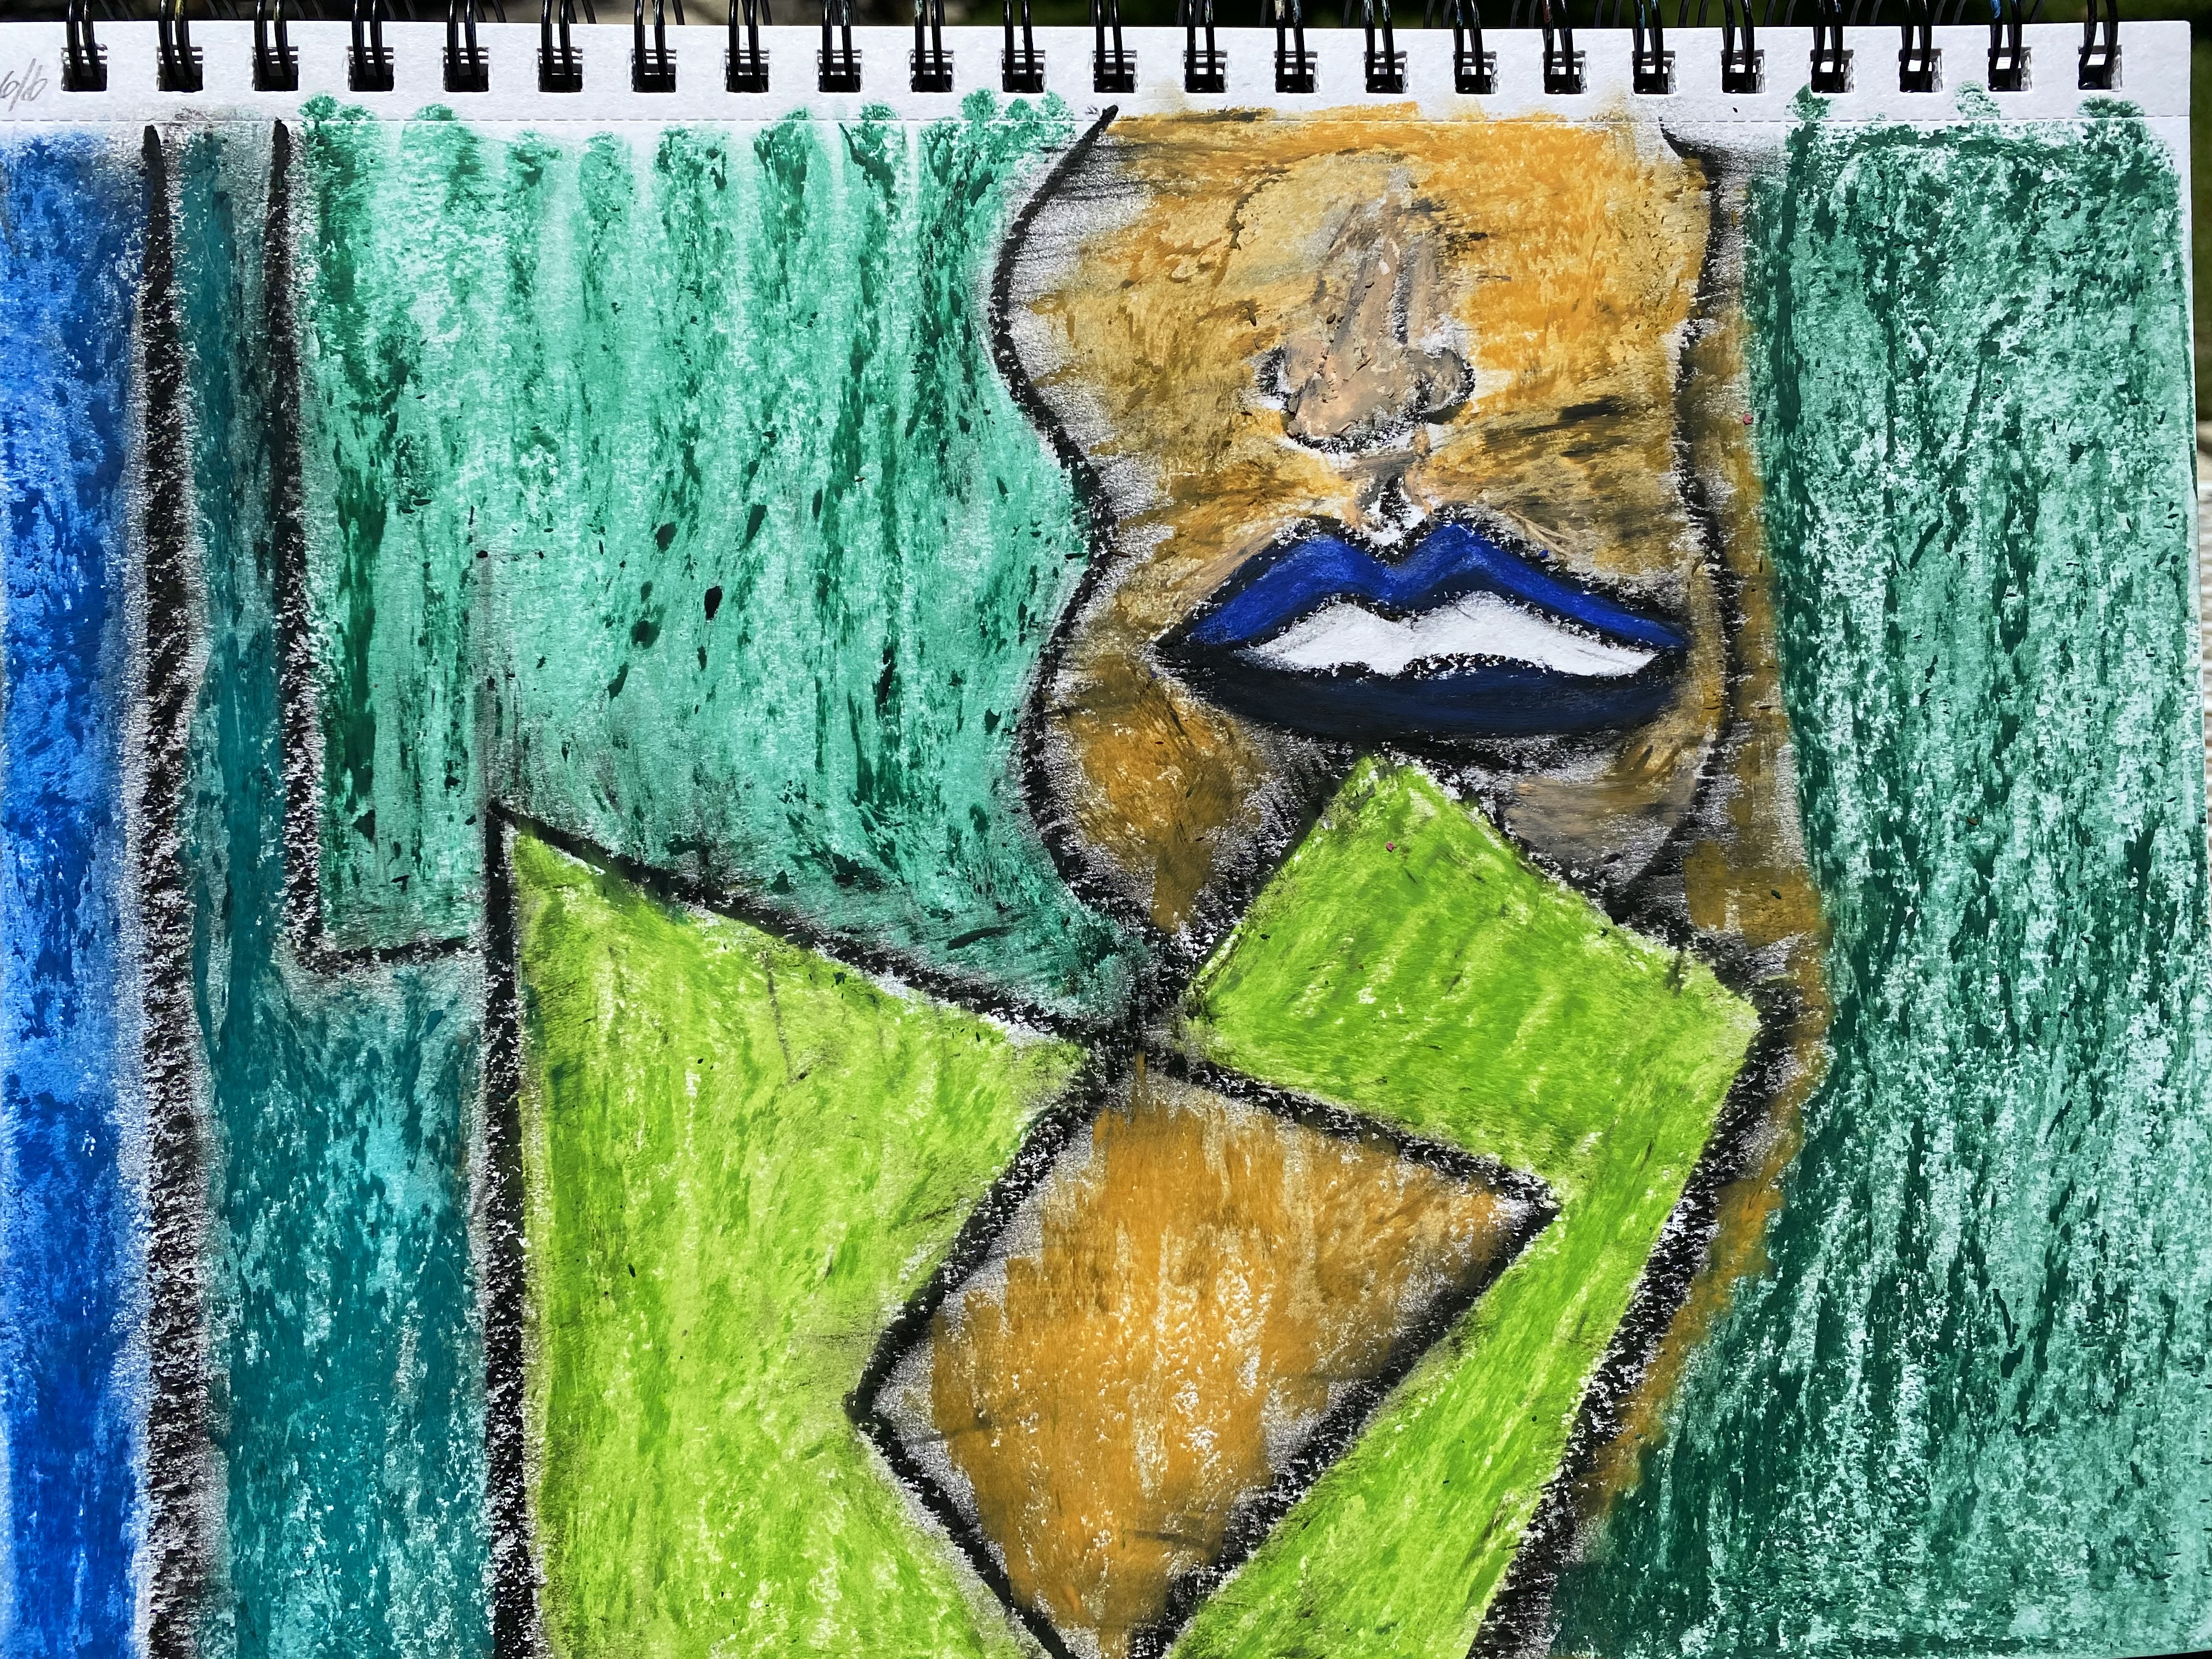 abstract sketch with shades of green, yellow, blue, nude, and copper made with oil pastels on a ucreate sketchbook.